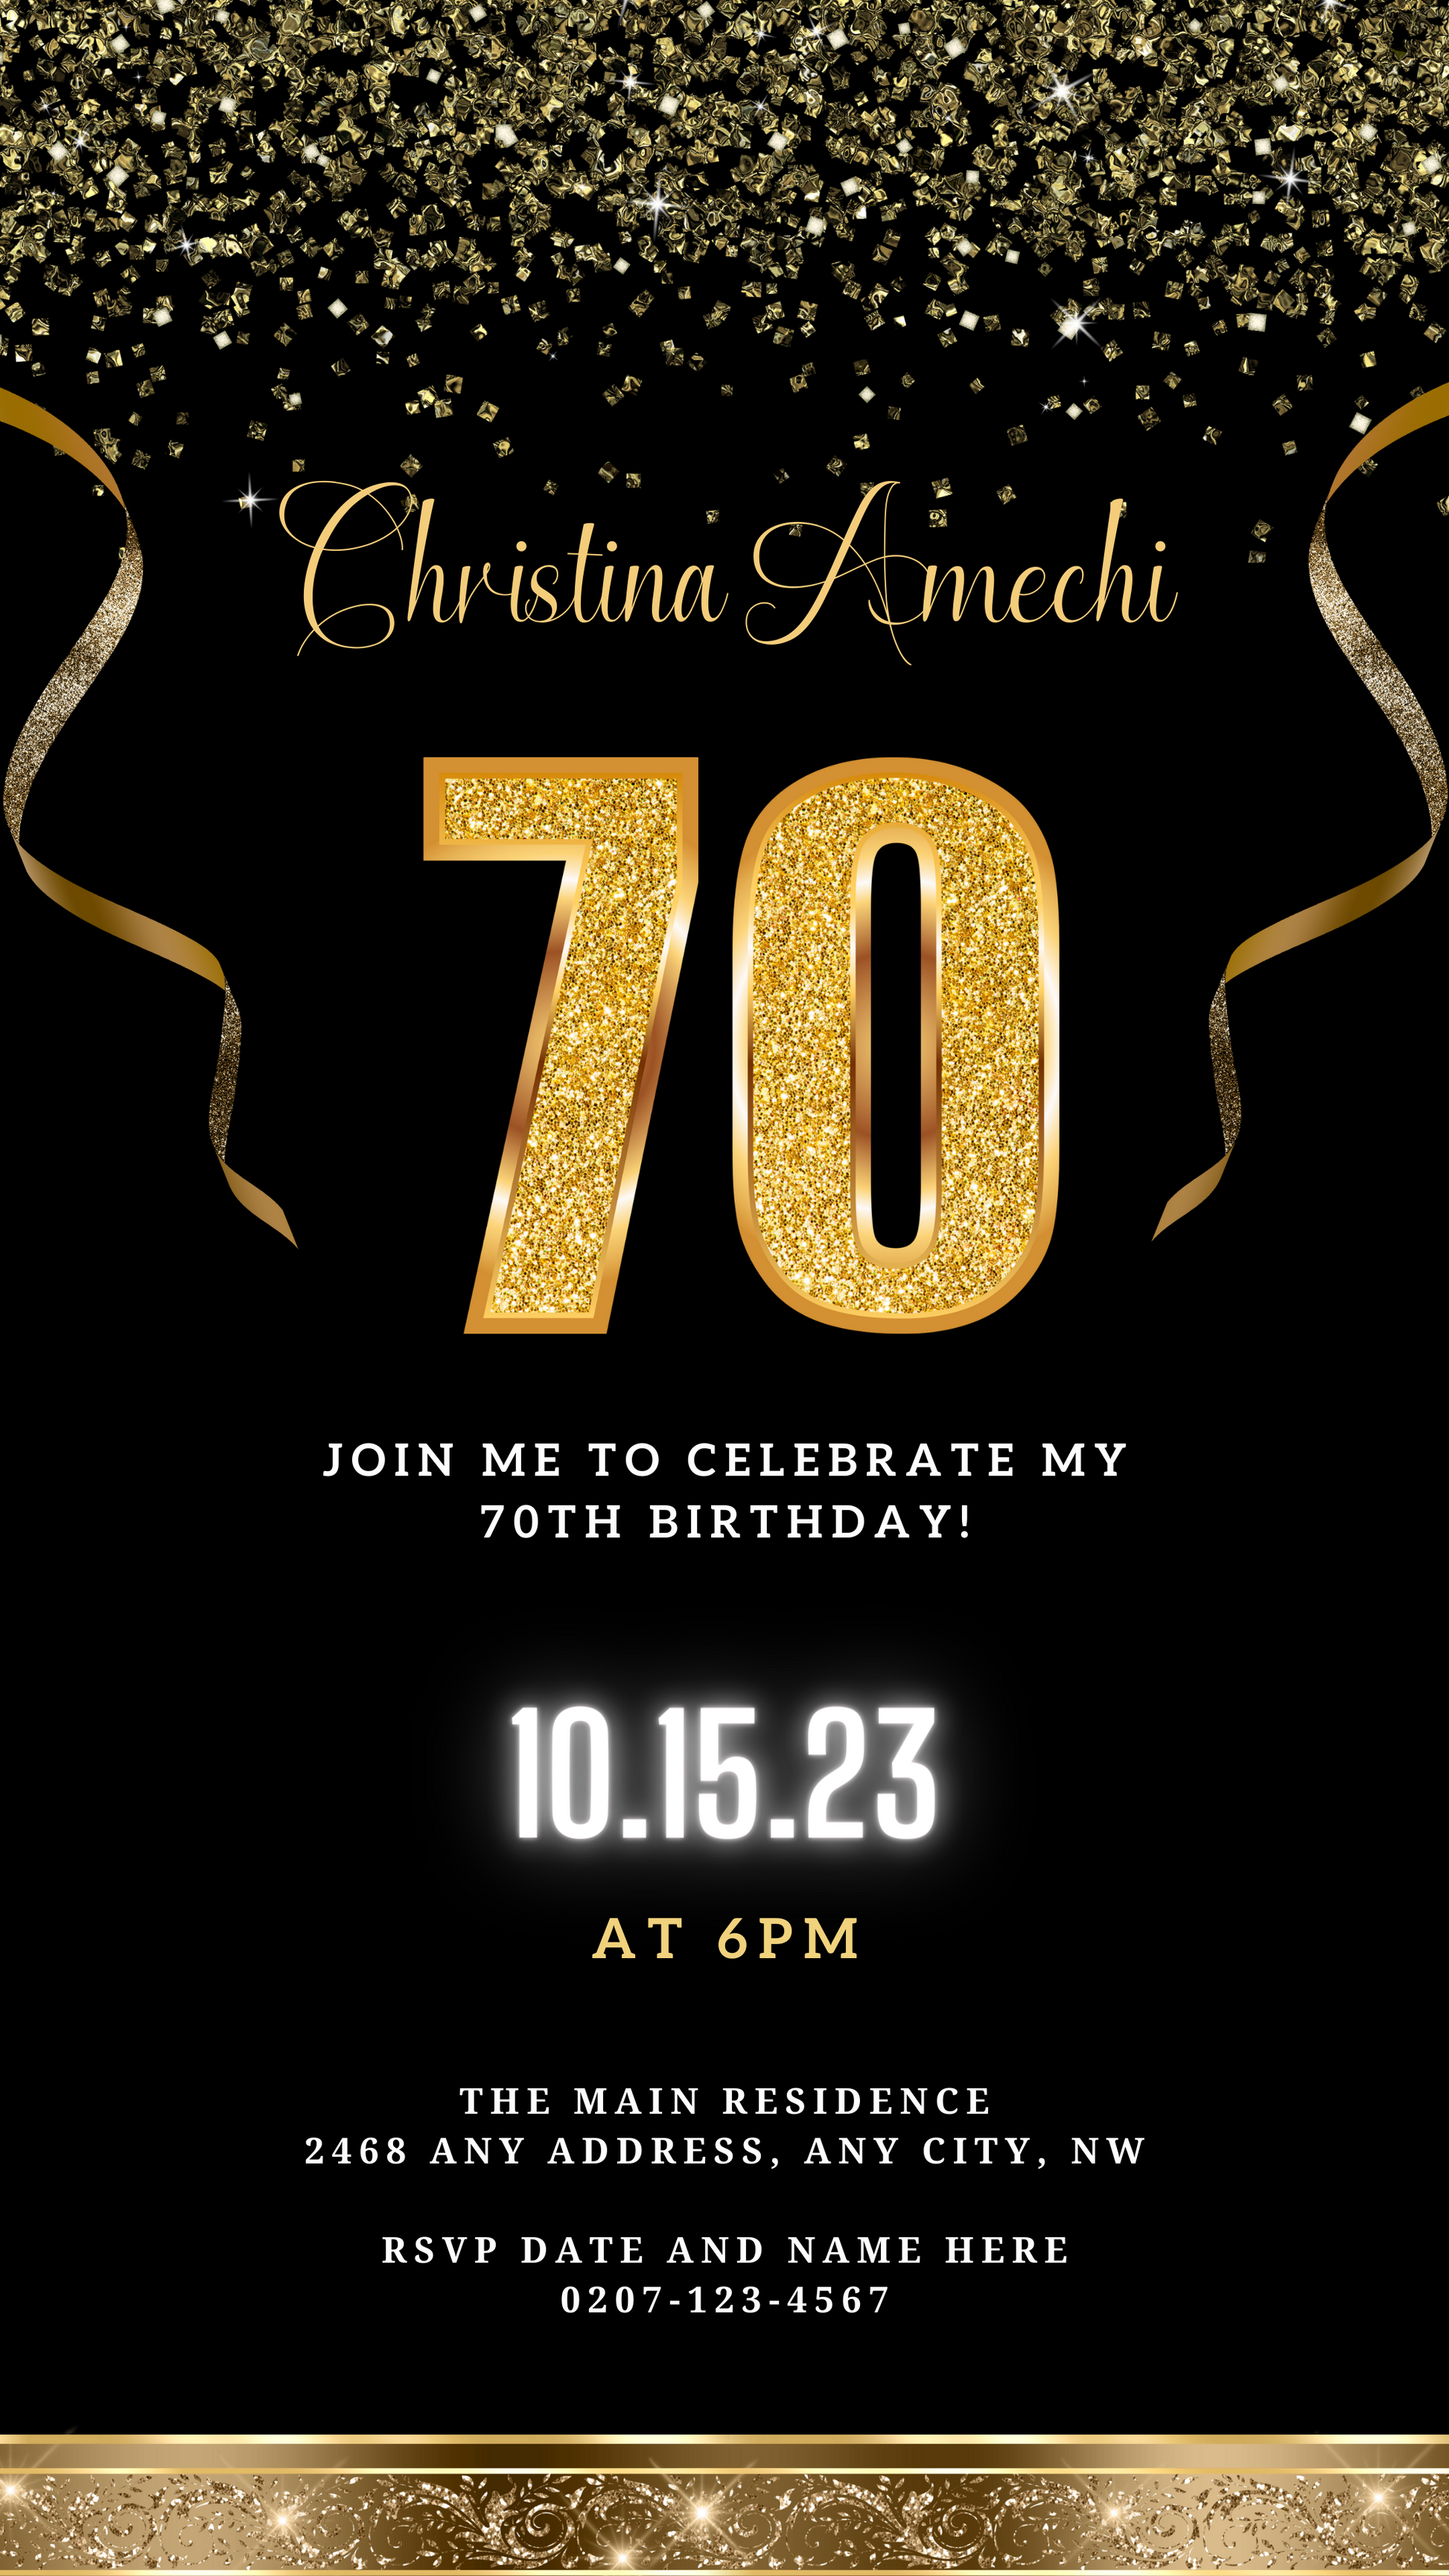 Black Gold Confetti 70th Birthday Evite: Customizable digital invitation with gold text and ribbons, designed for easy personalization via Canva. Perfect for sharing electronically.